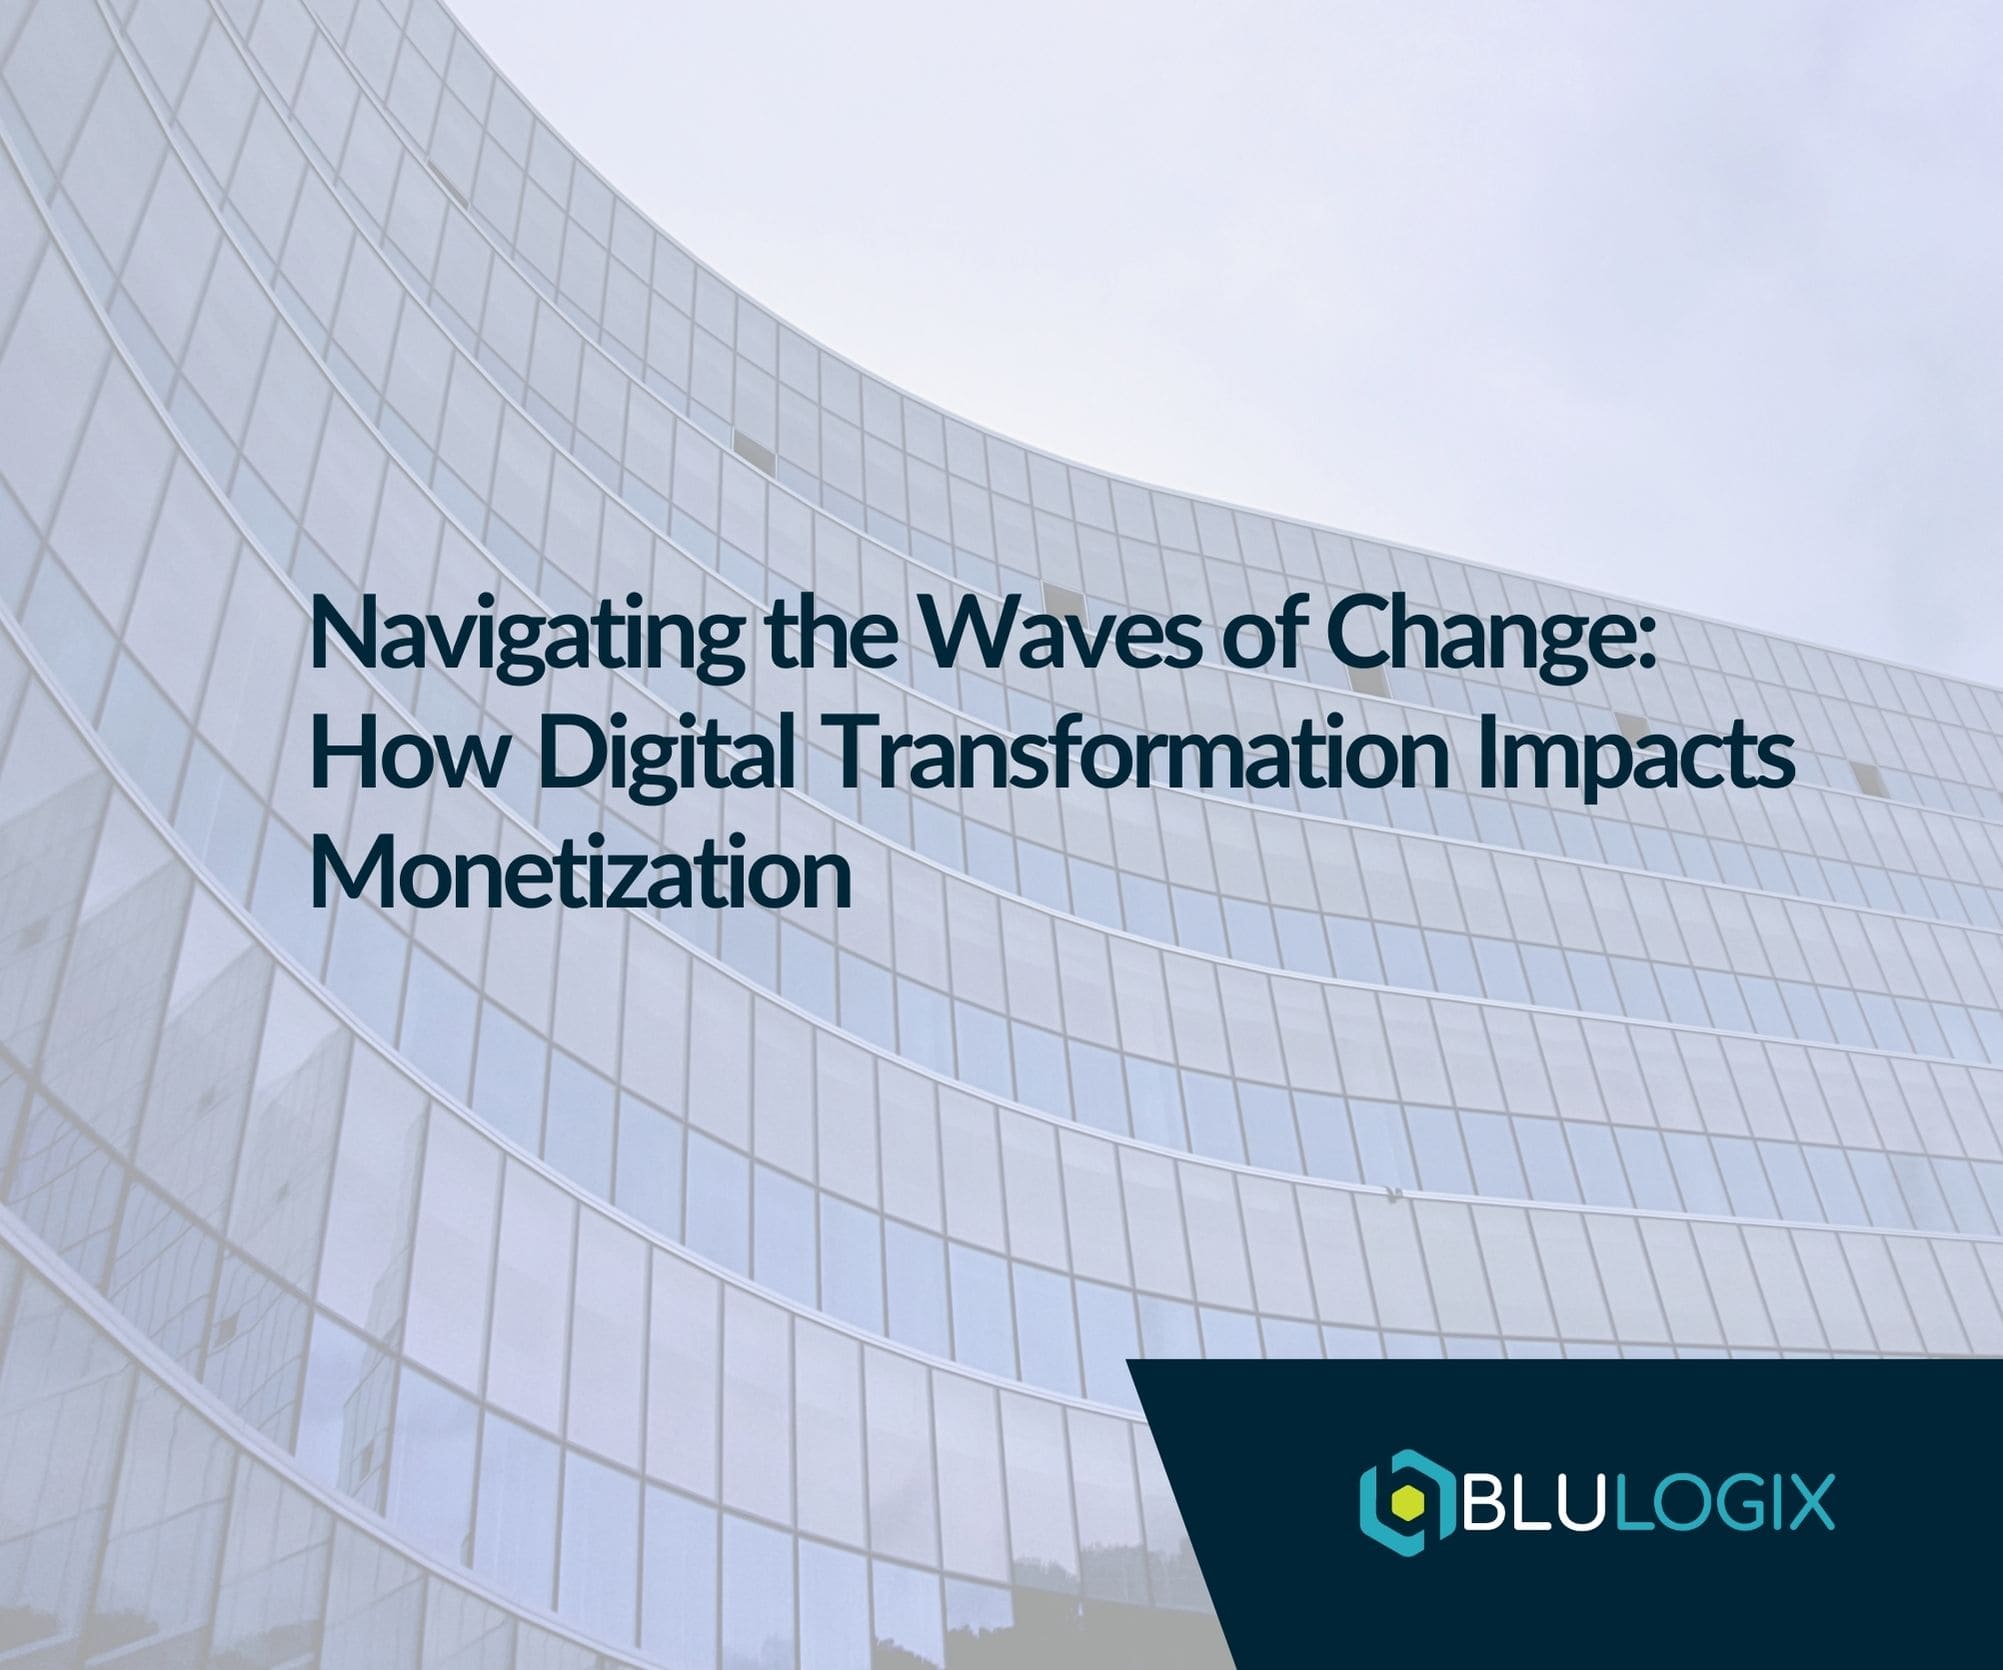 Navigating the Waves of Change How Digital Transformation Impacts Monetization